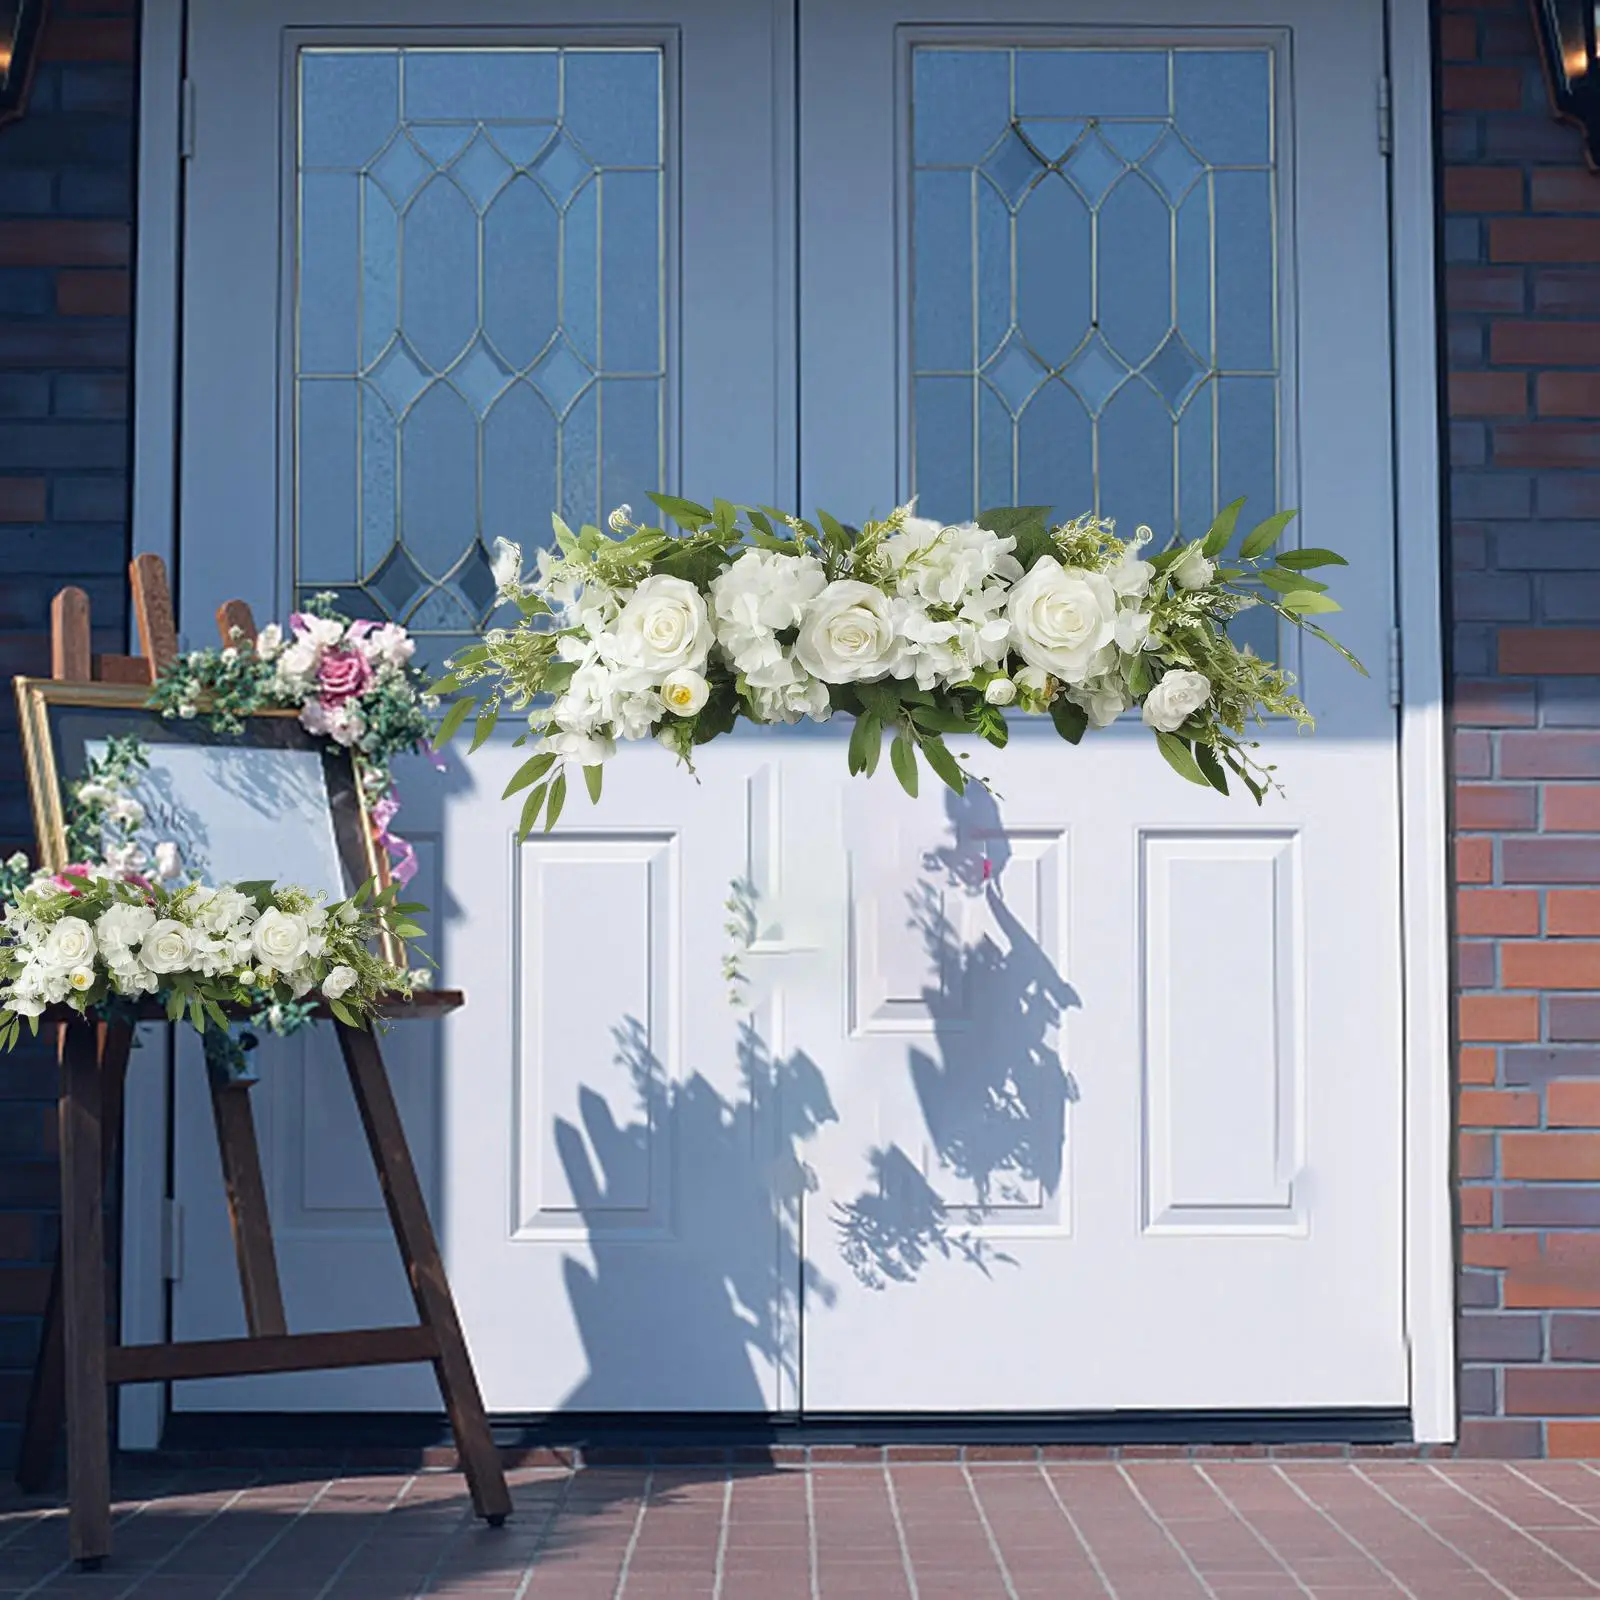 Artificial Floral Swag Welcome Sign Arrangements Silk Roses Wedding Arch Flowers for Celebration Door Lintel Wall Decorative